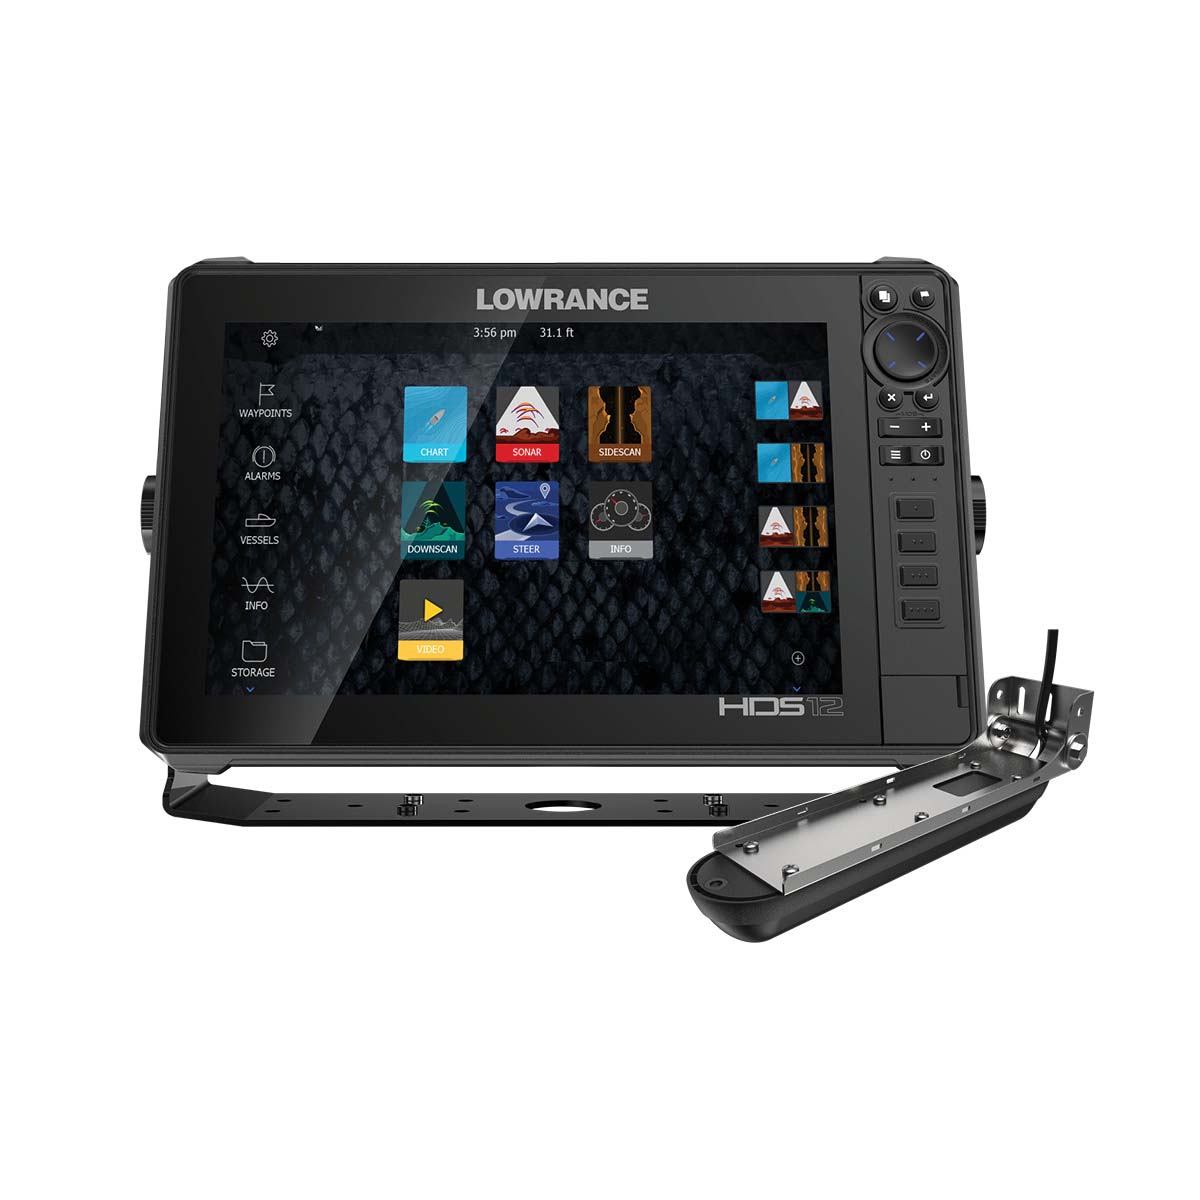 Lowrance HDS-12 Live Combo Including Active Image 3-1 Transducer and CMAP @ Club BCF